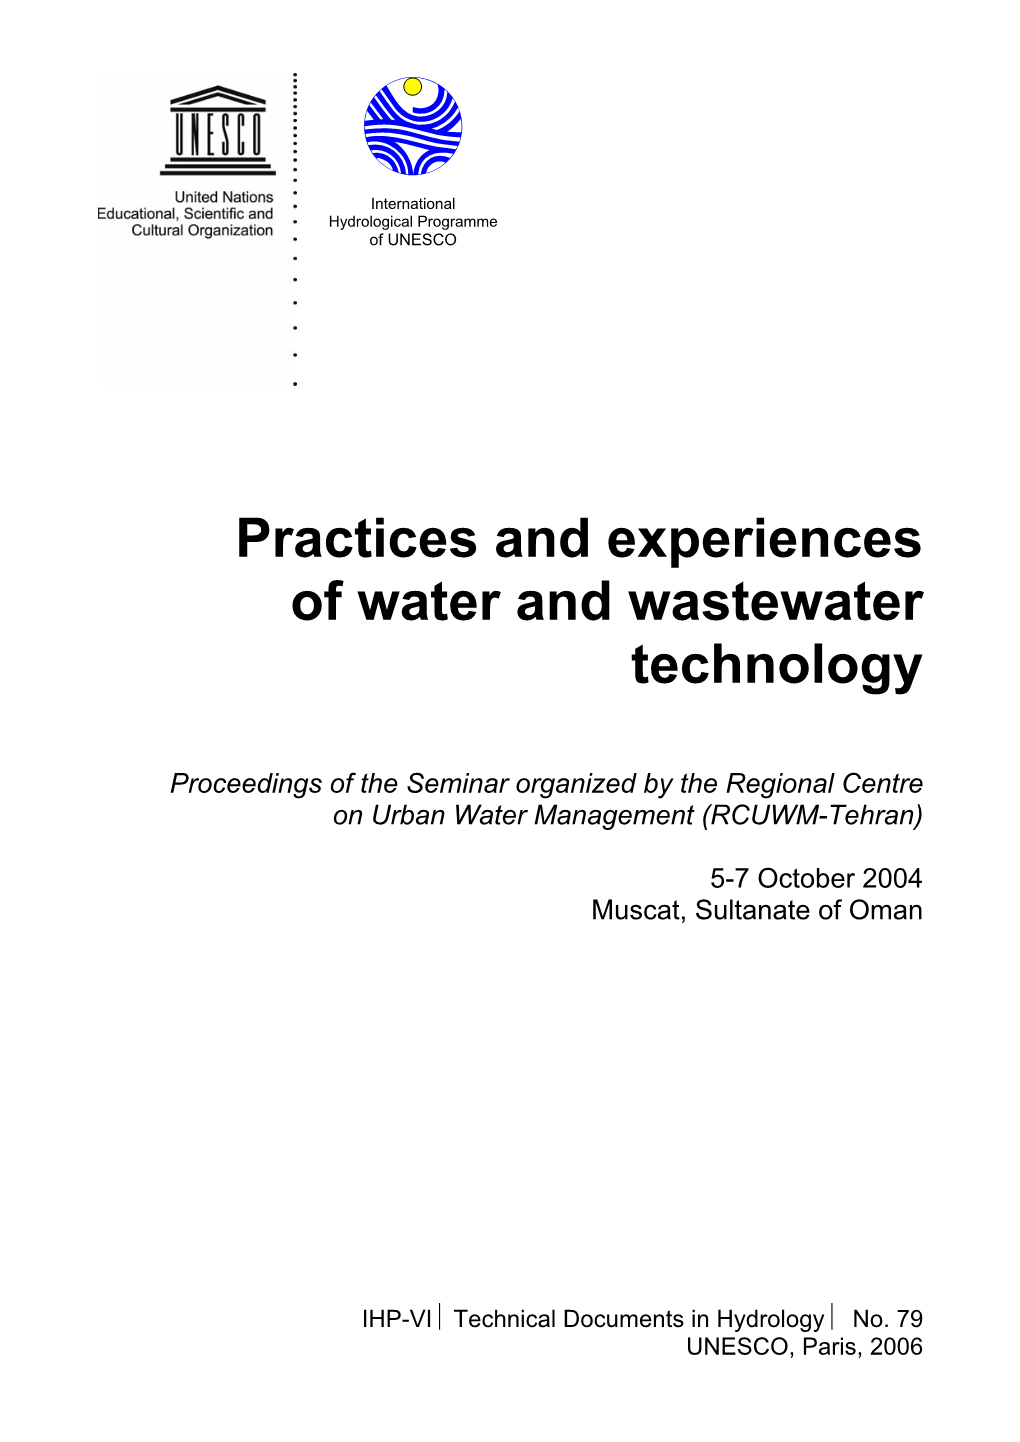 Practices and Experiences of Water and Wastewater Technology